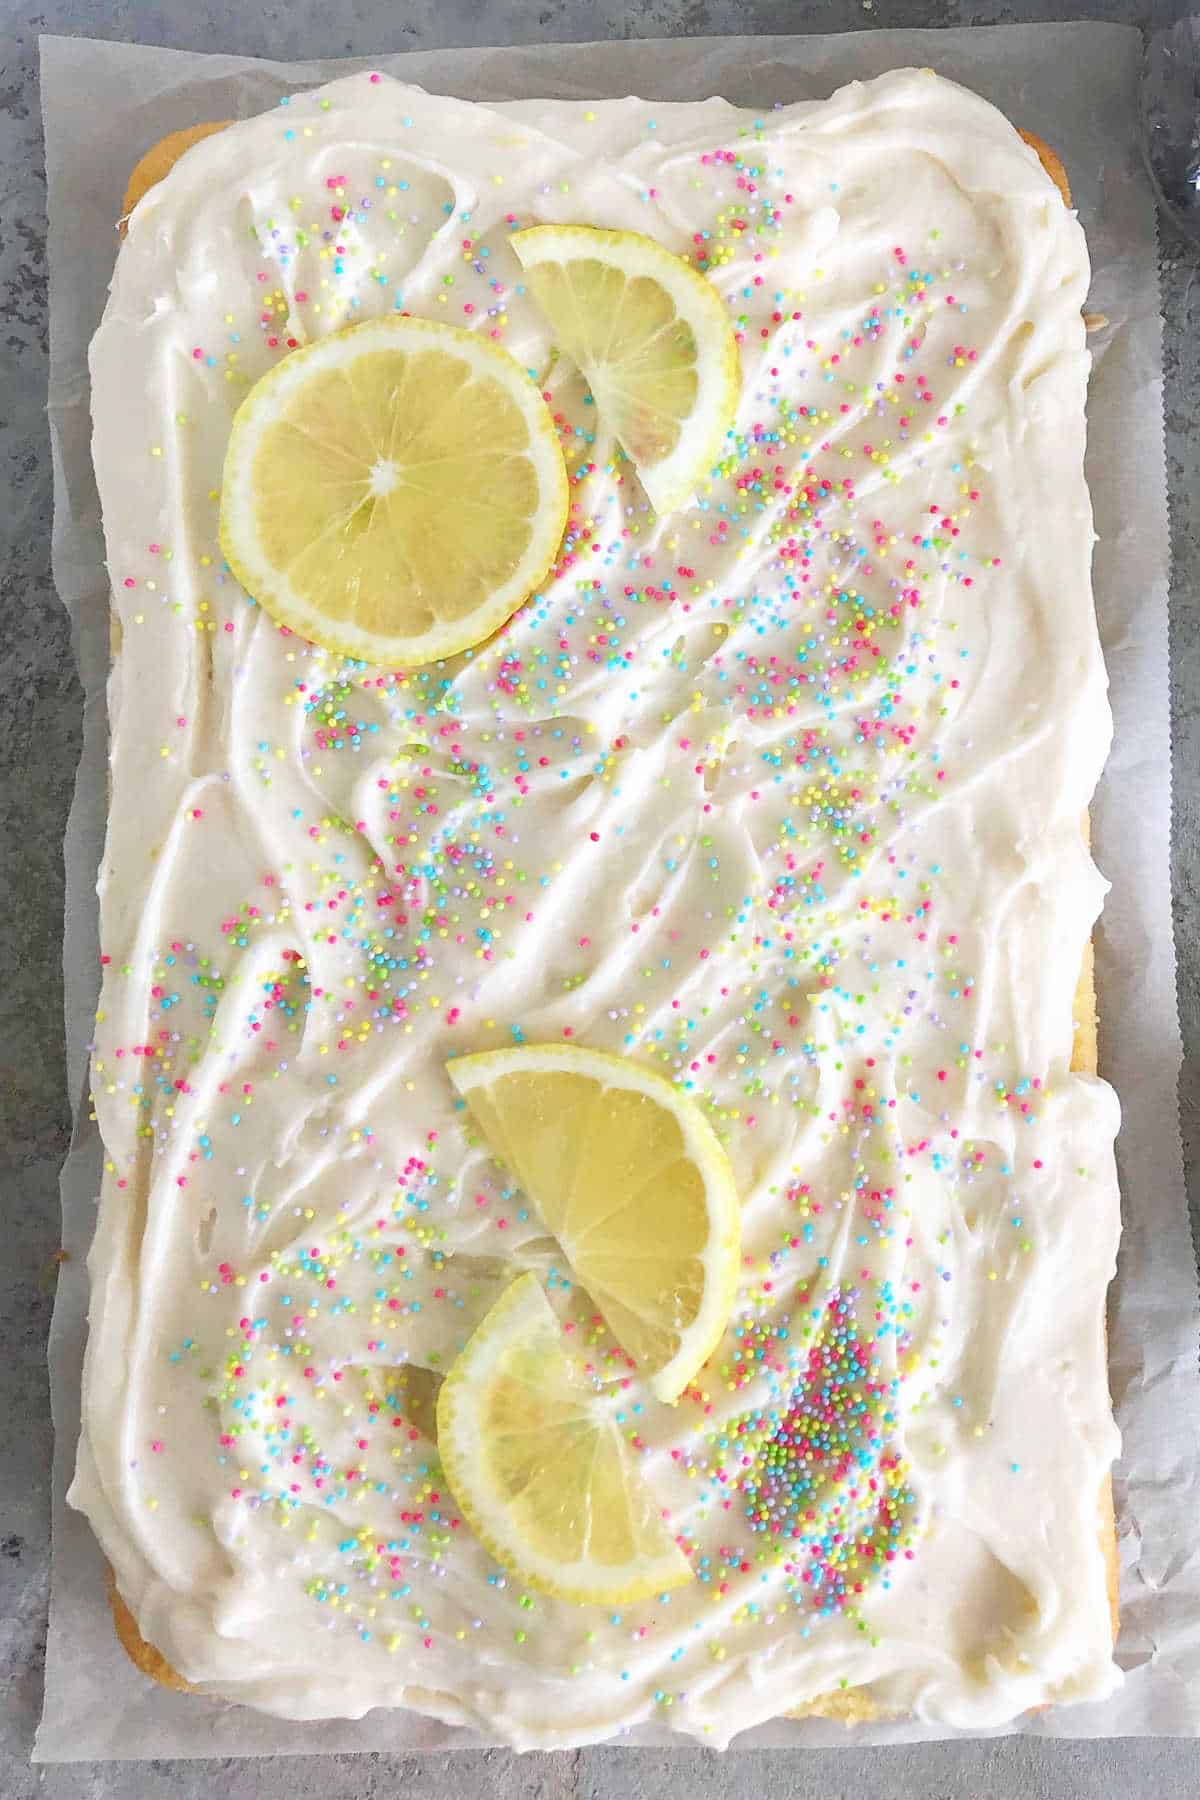 Top view of frosted lemon sheet cake with sprinkles and lemon slices.